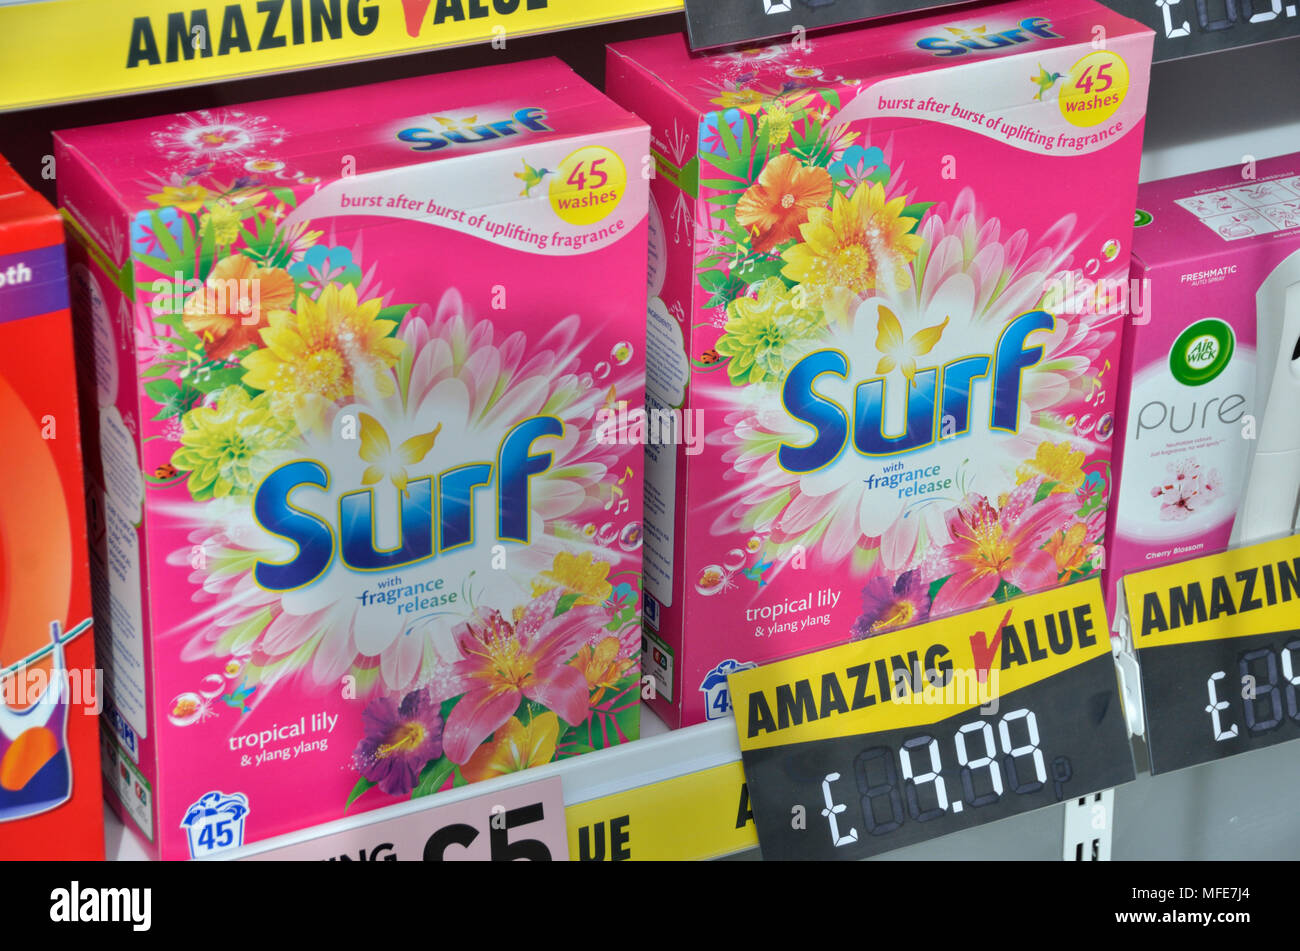 Surf washing powder boxes in a shop window. Stock Photo